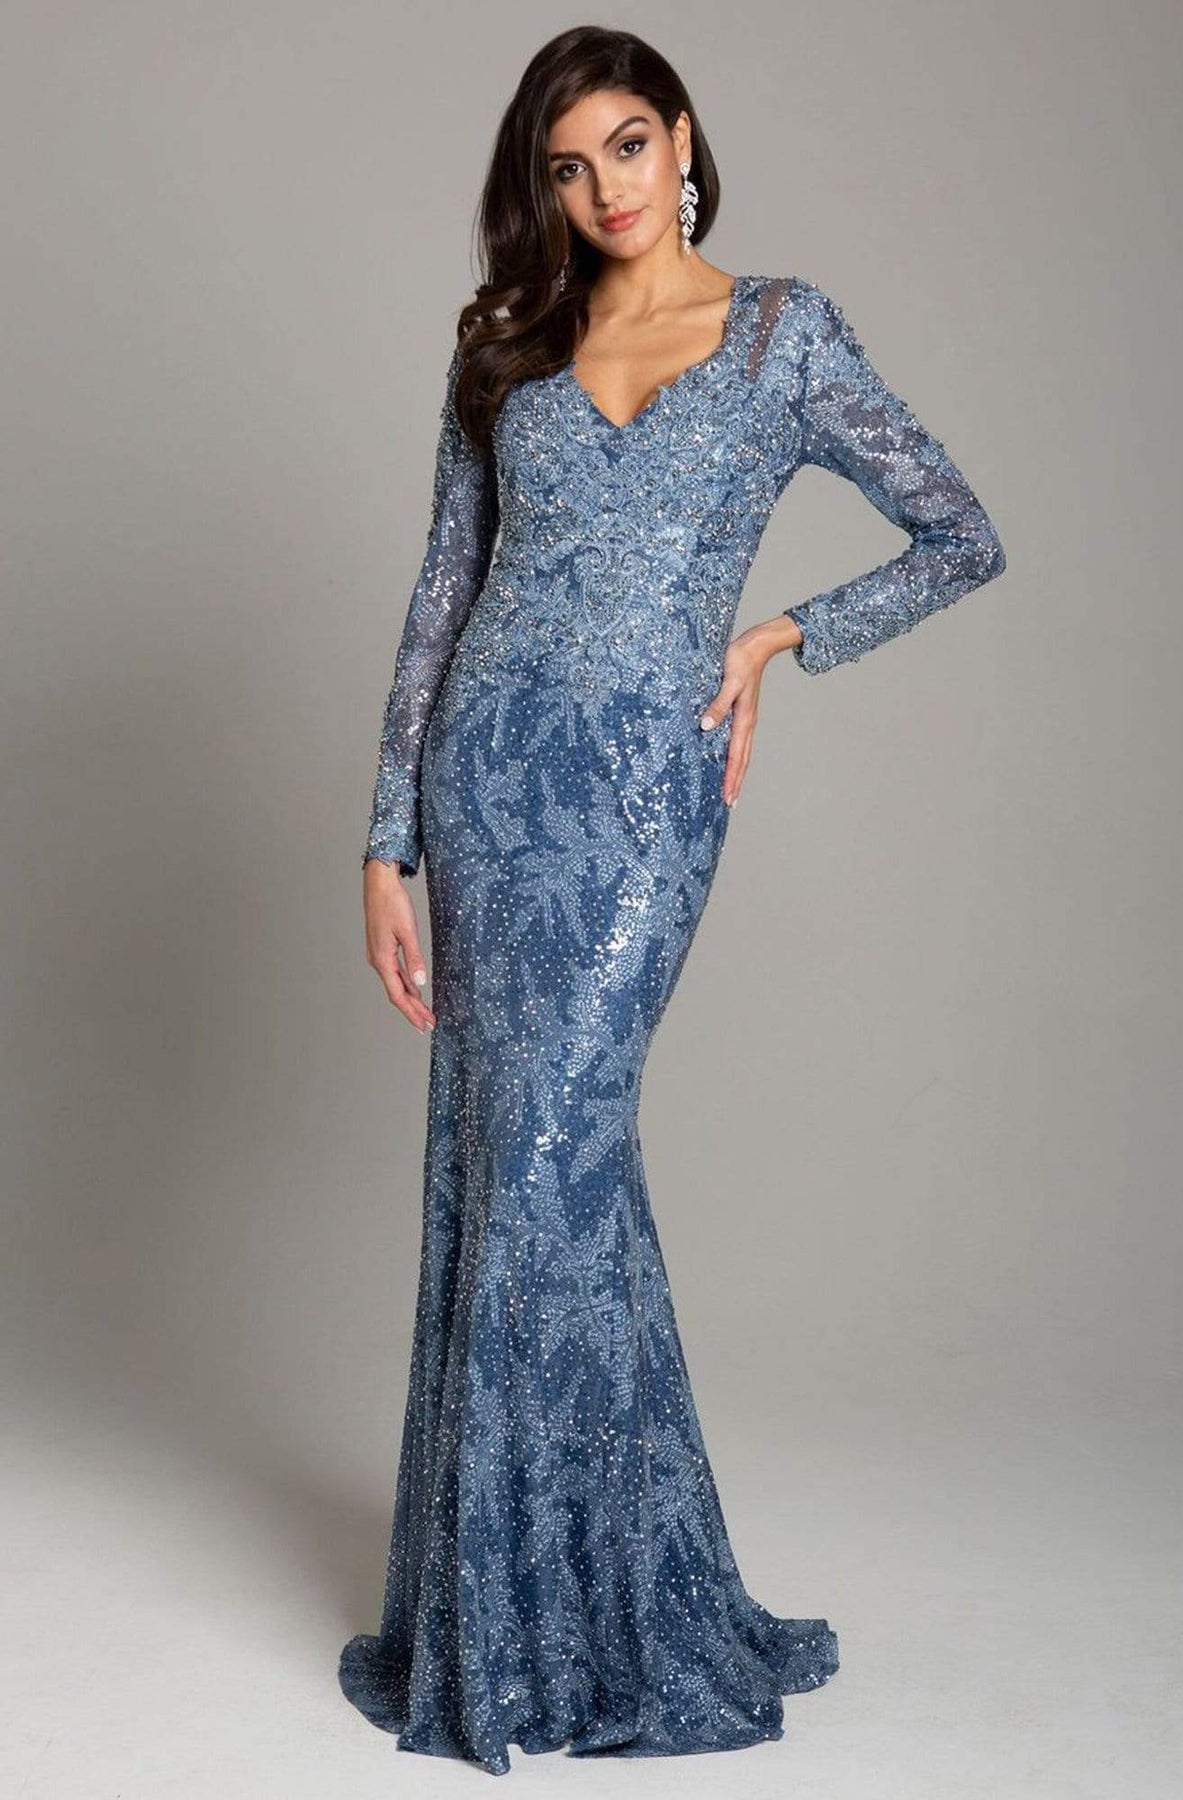 Lara Dresses - 29885 Long Sleeve Sequined Lace Mermaid Gown Mother of the Bride Dresses 6 / Slate